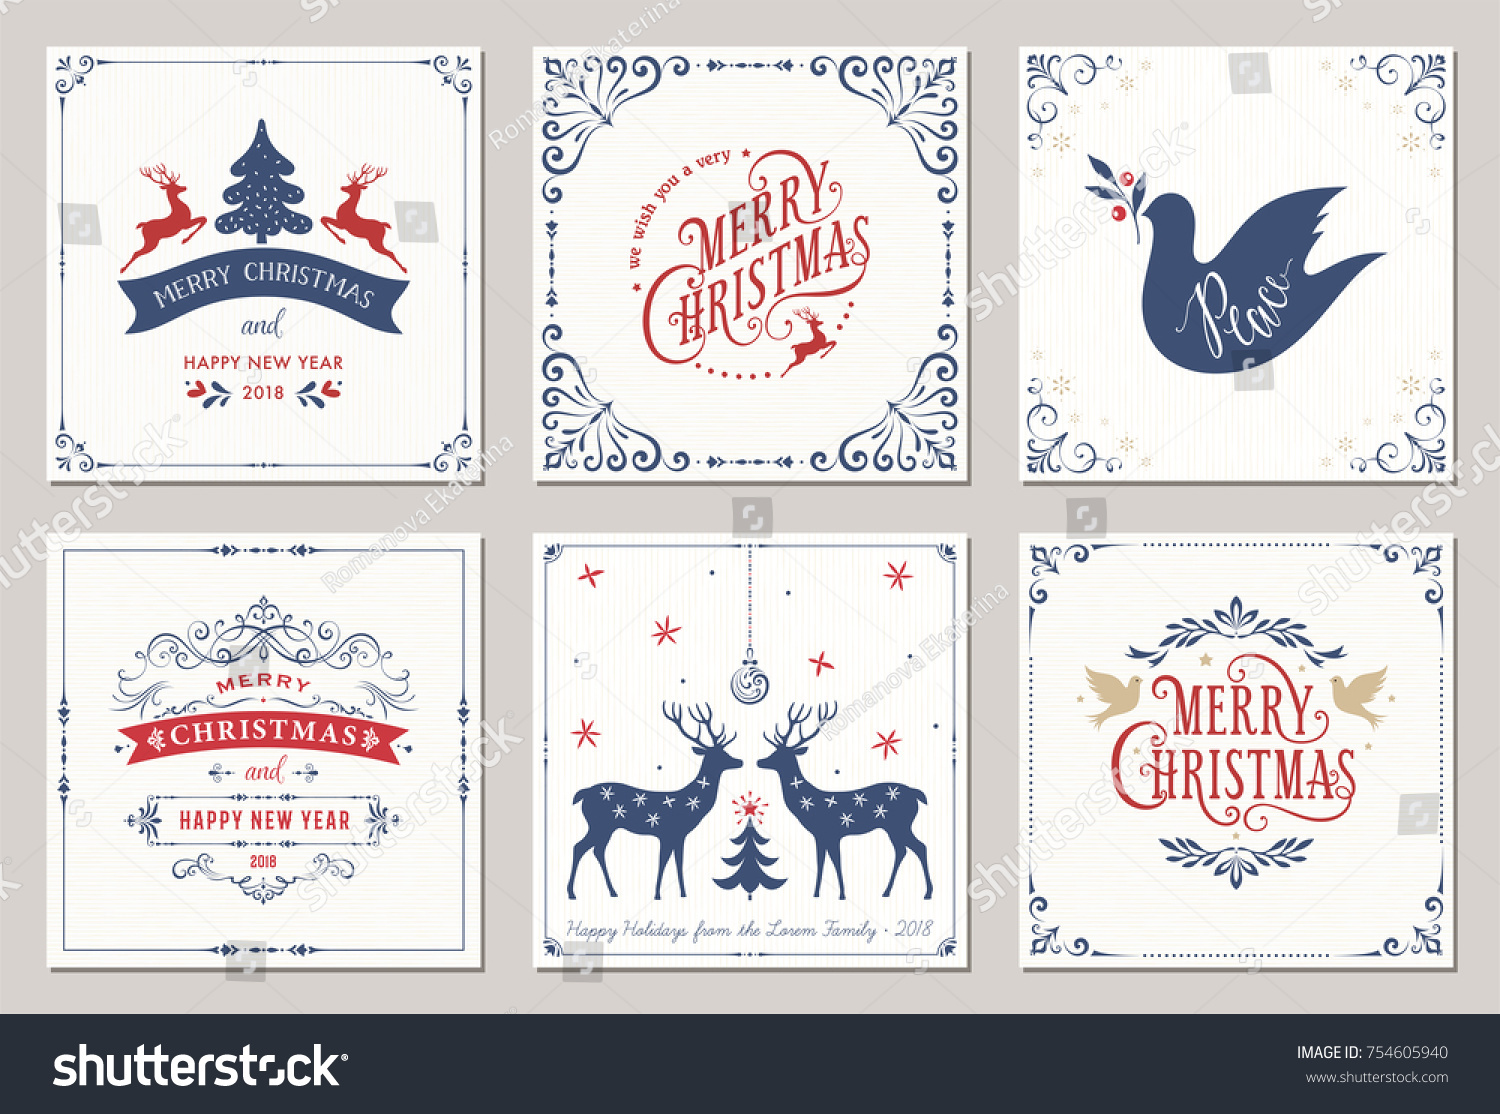 Ornate square winter holidays greeting cards with New Year tree, reindeers, Christmas ornaments, Peace Doves, swirl frames and typographic design. Vector illustration. #754605940